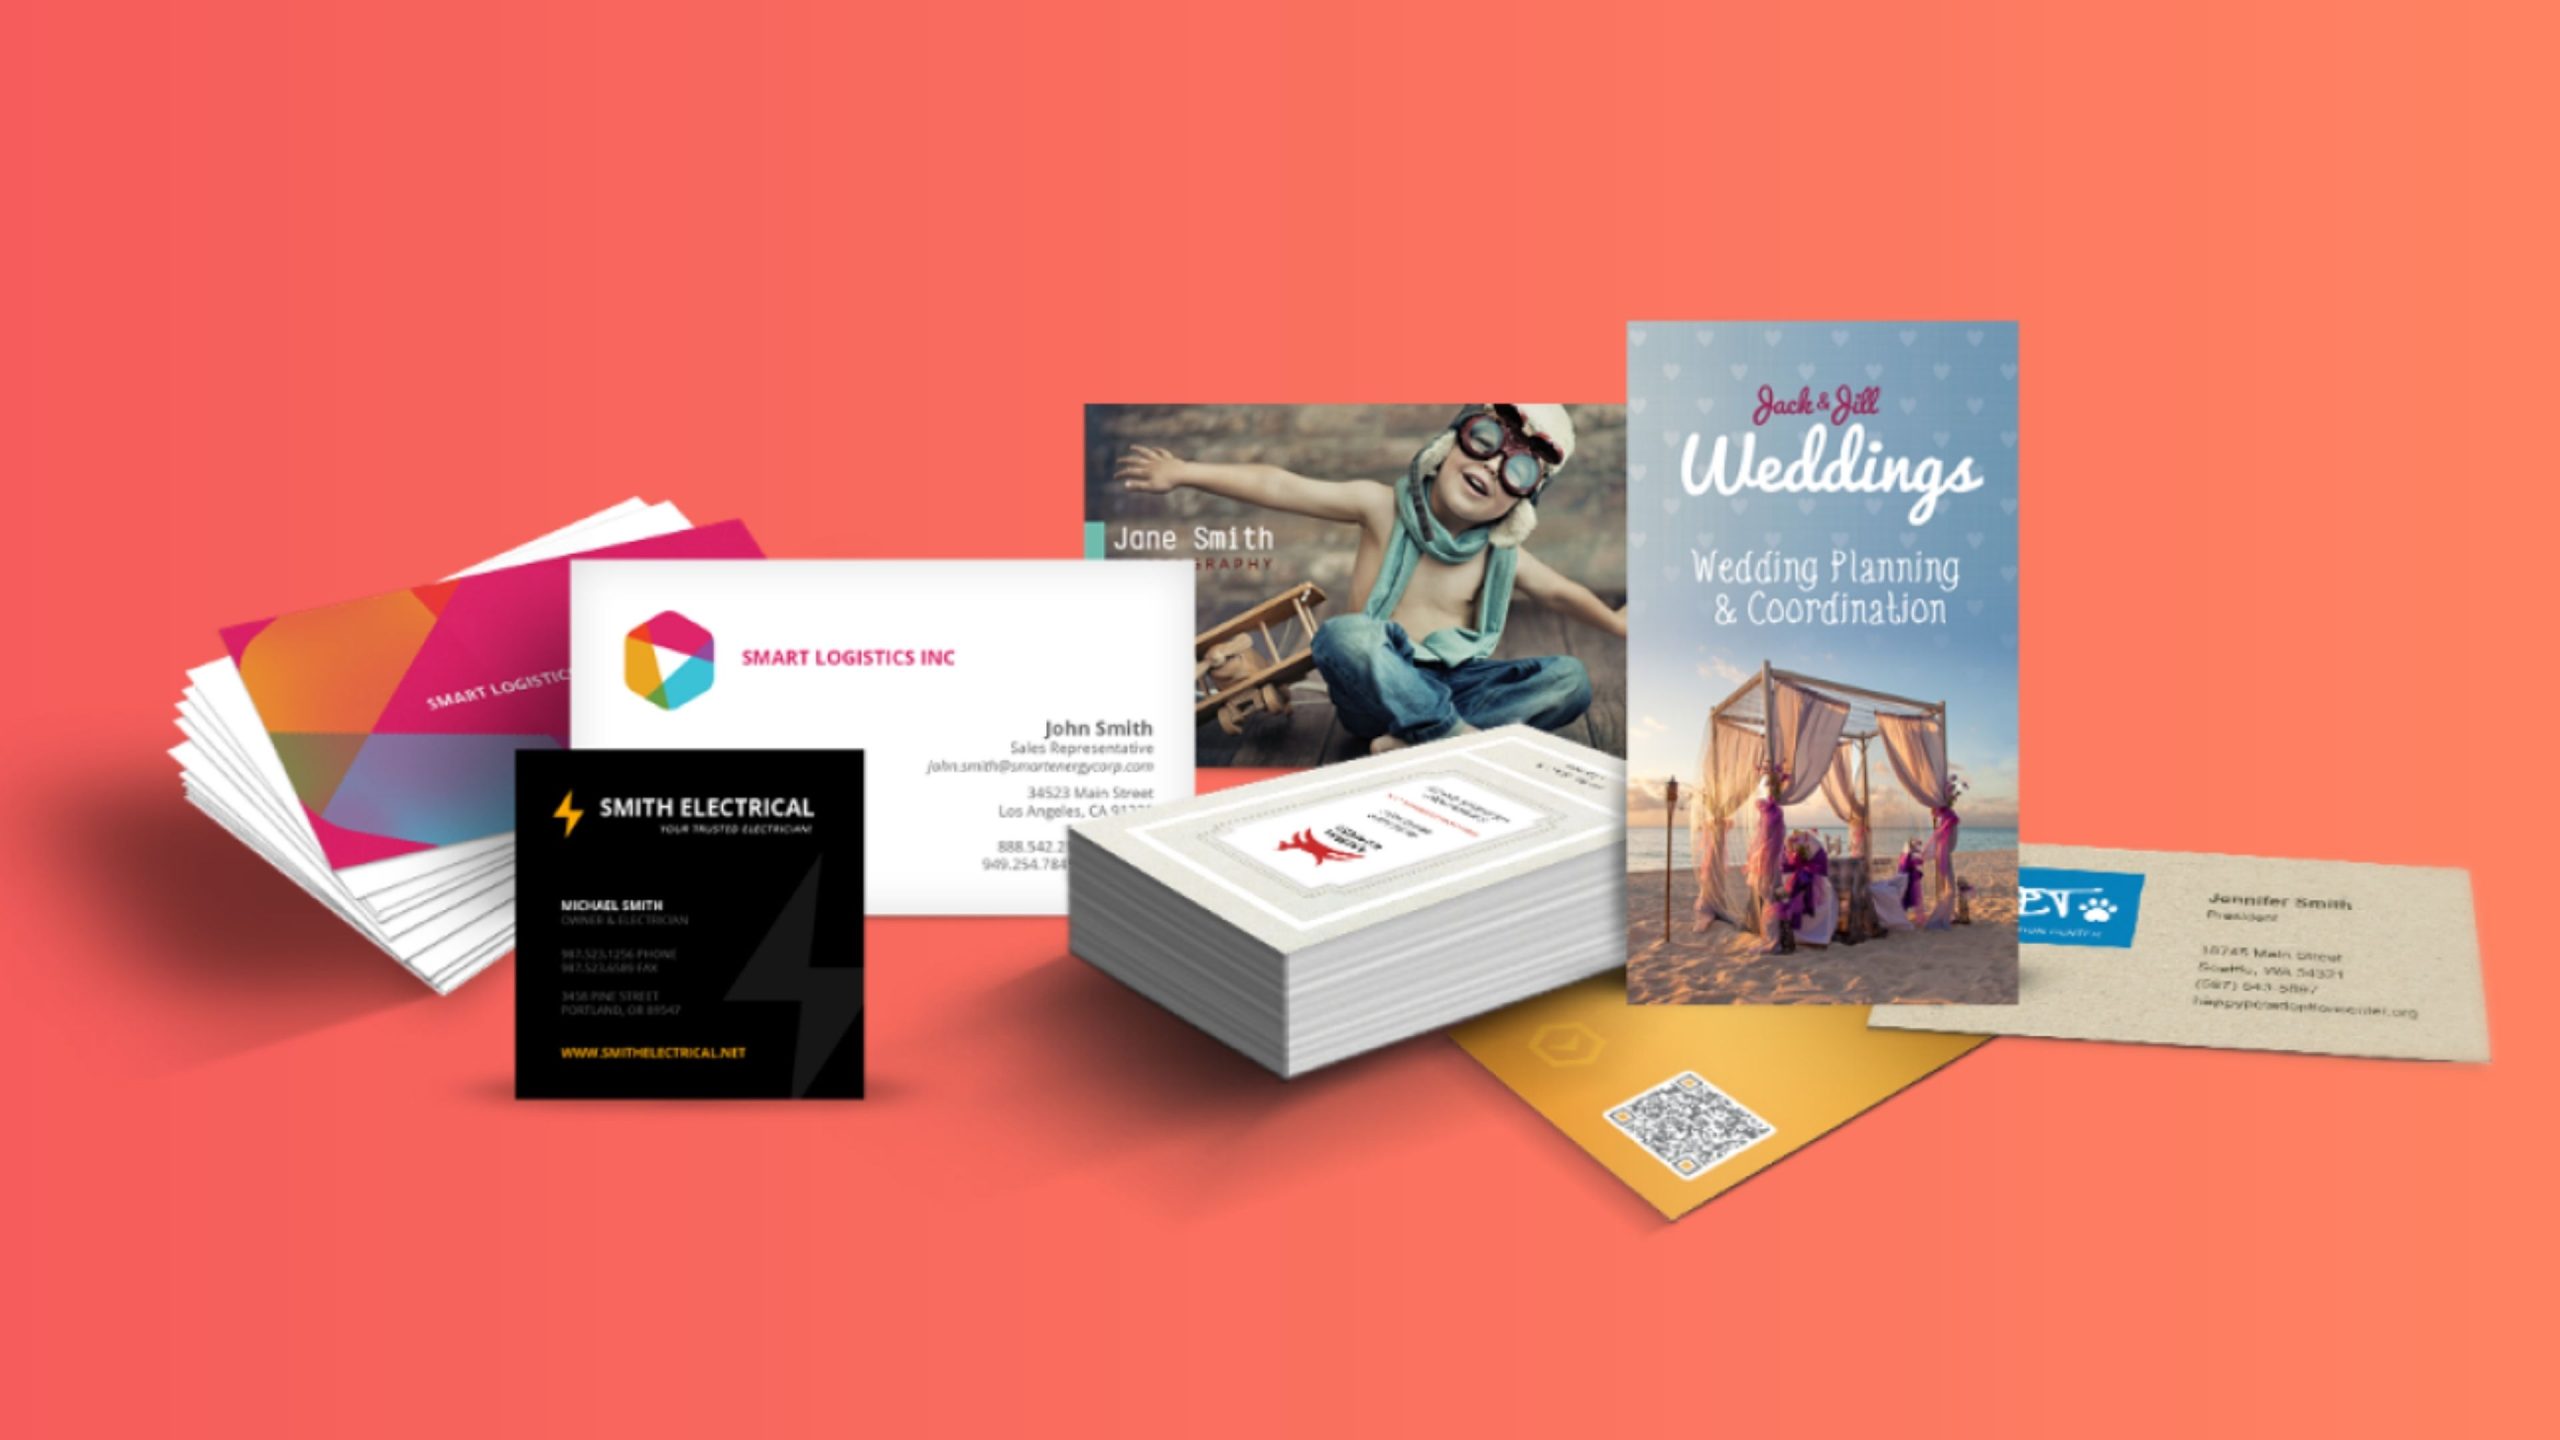 Collection of brochures with different designs and types